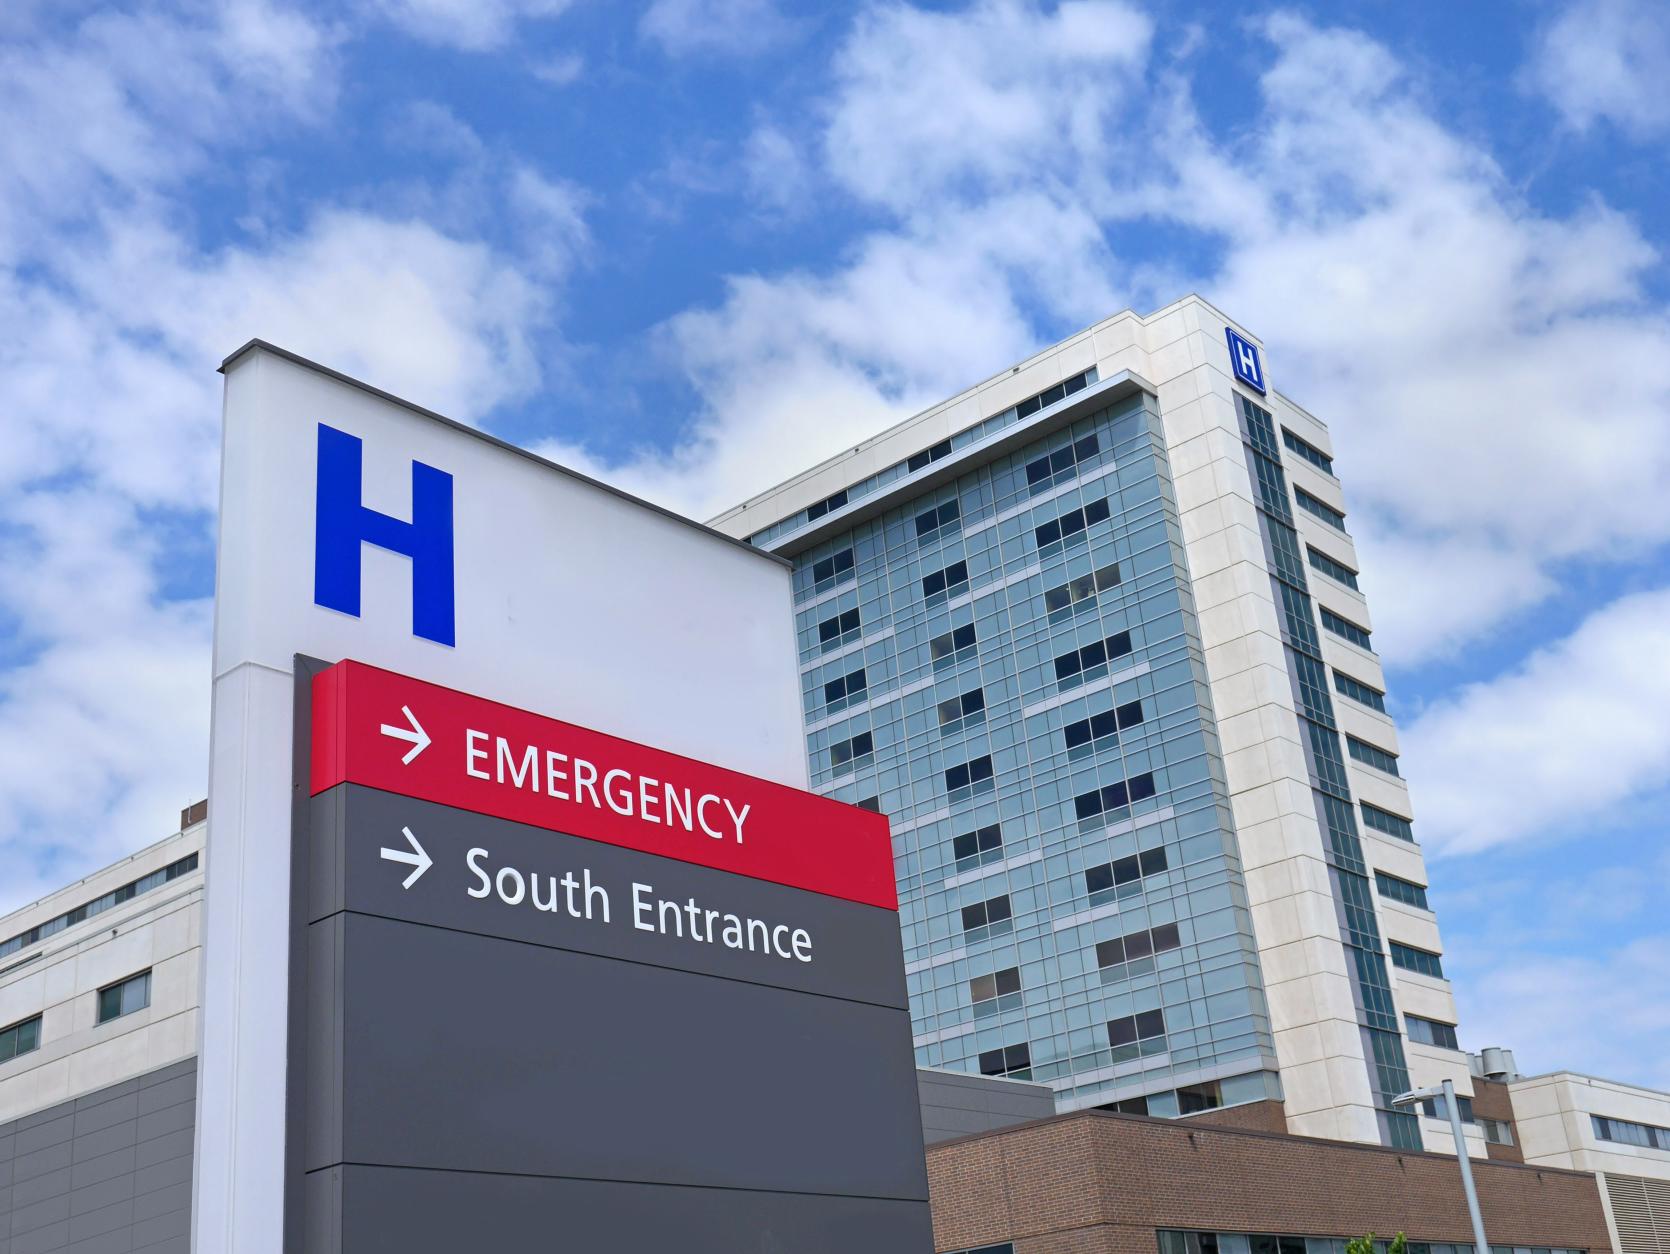 Image of hospital building exterior with signage that points to emergency room.